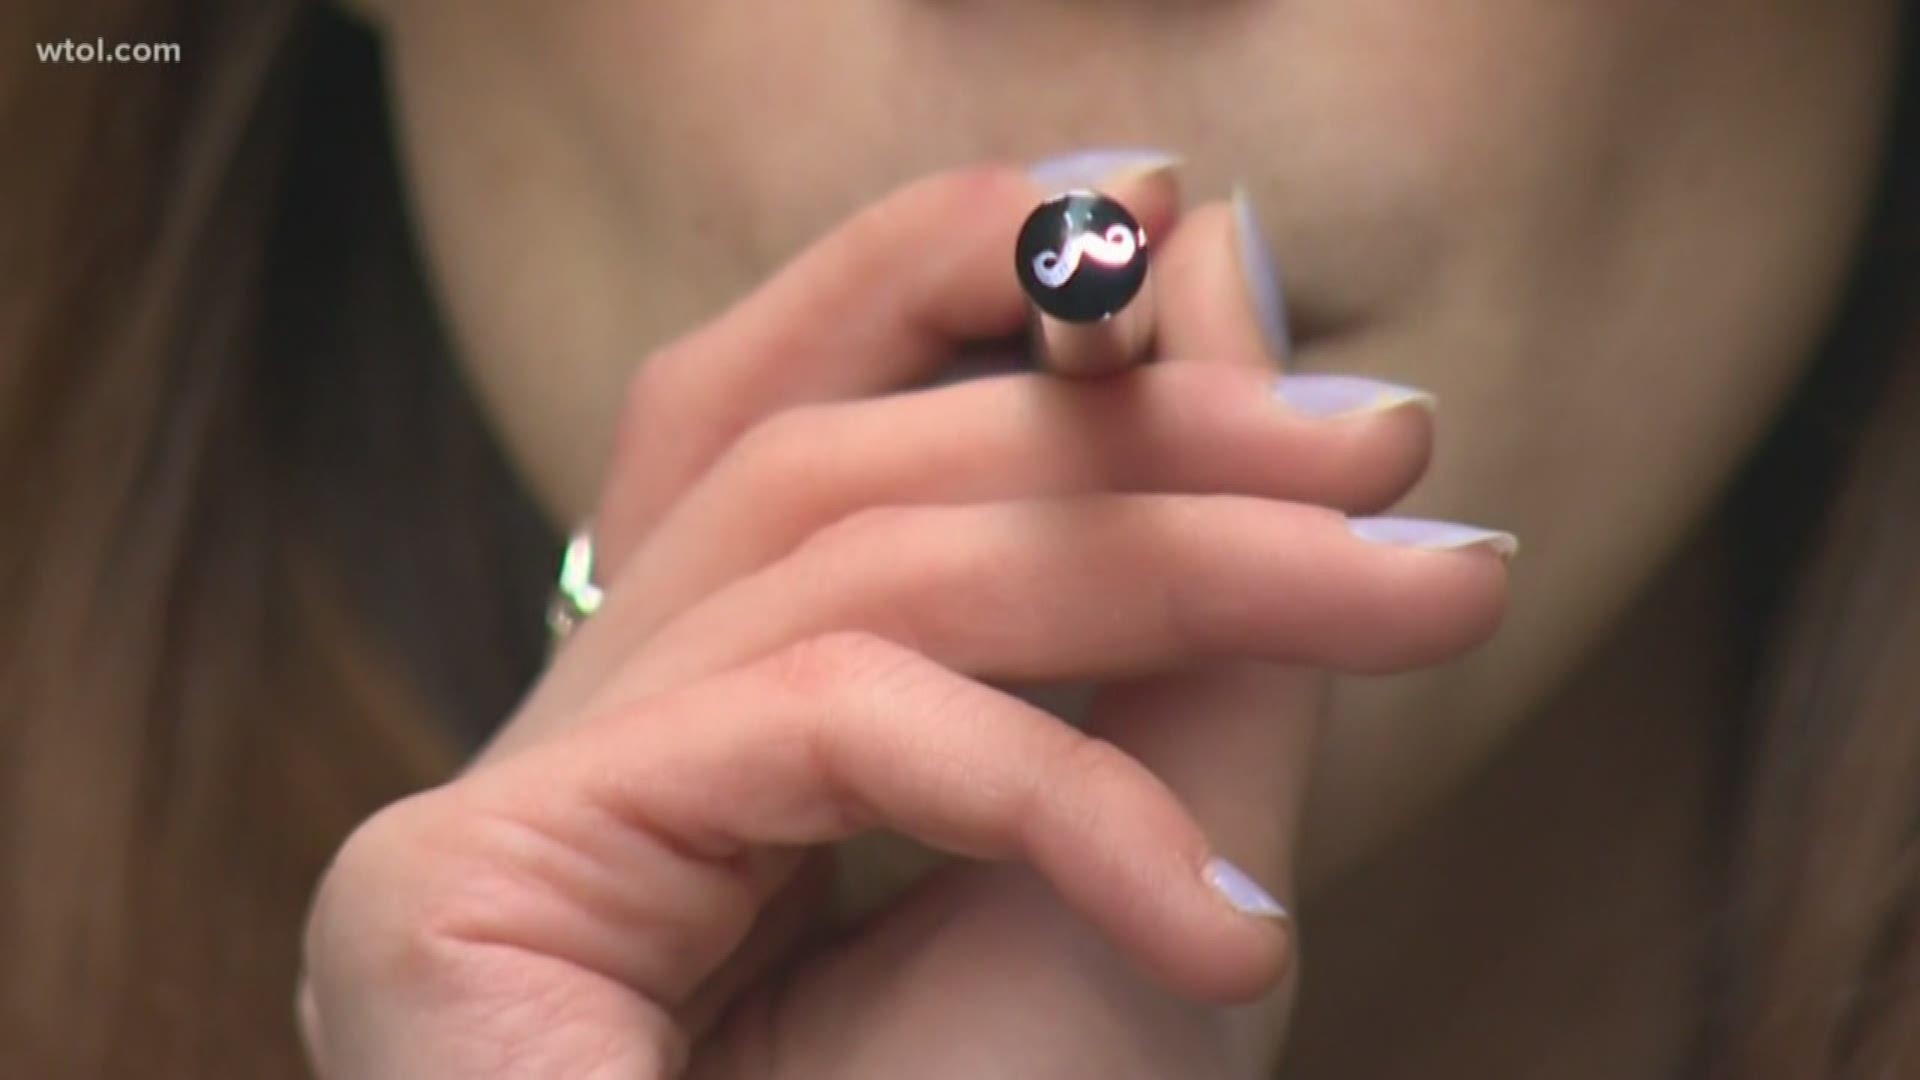 The ordinance only allows vape stores to sell flavored vaping products.